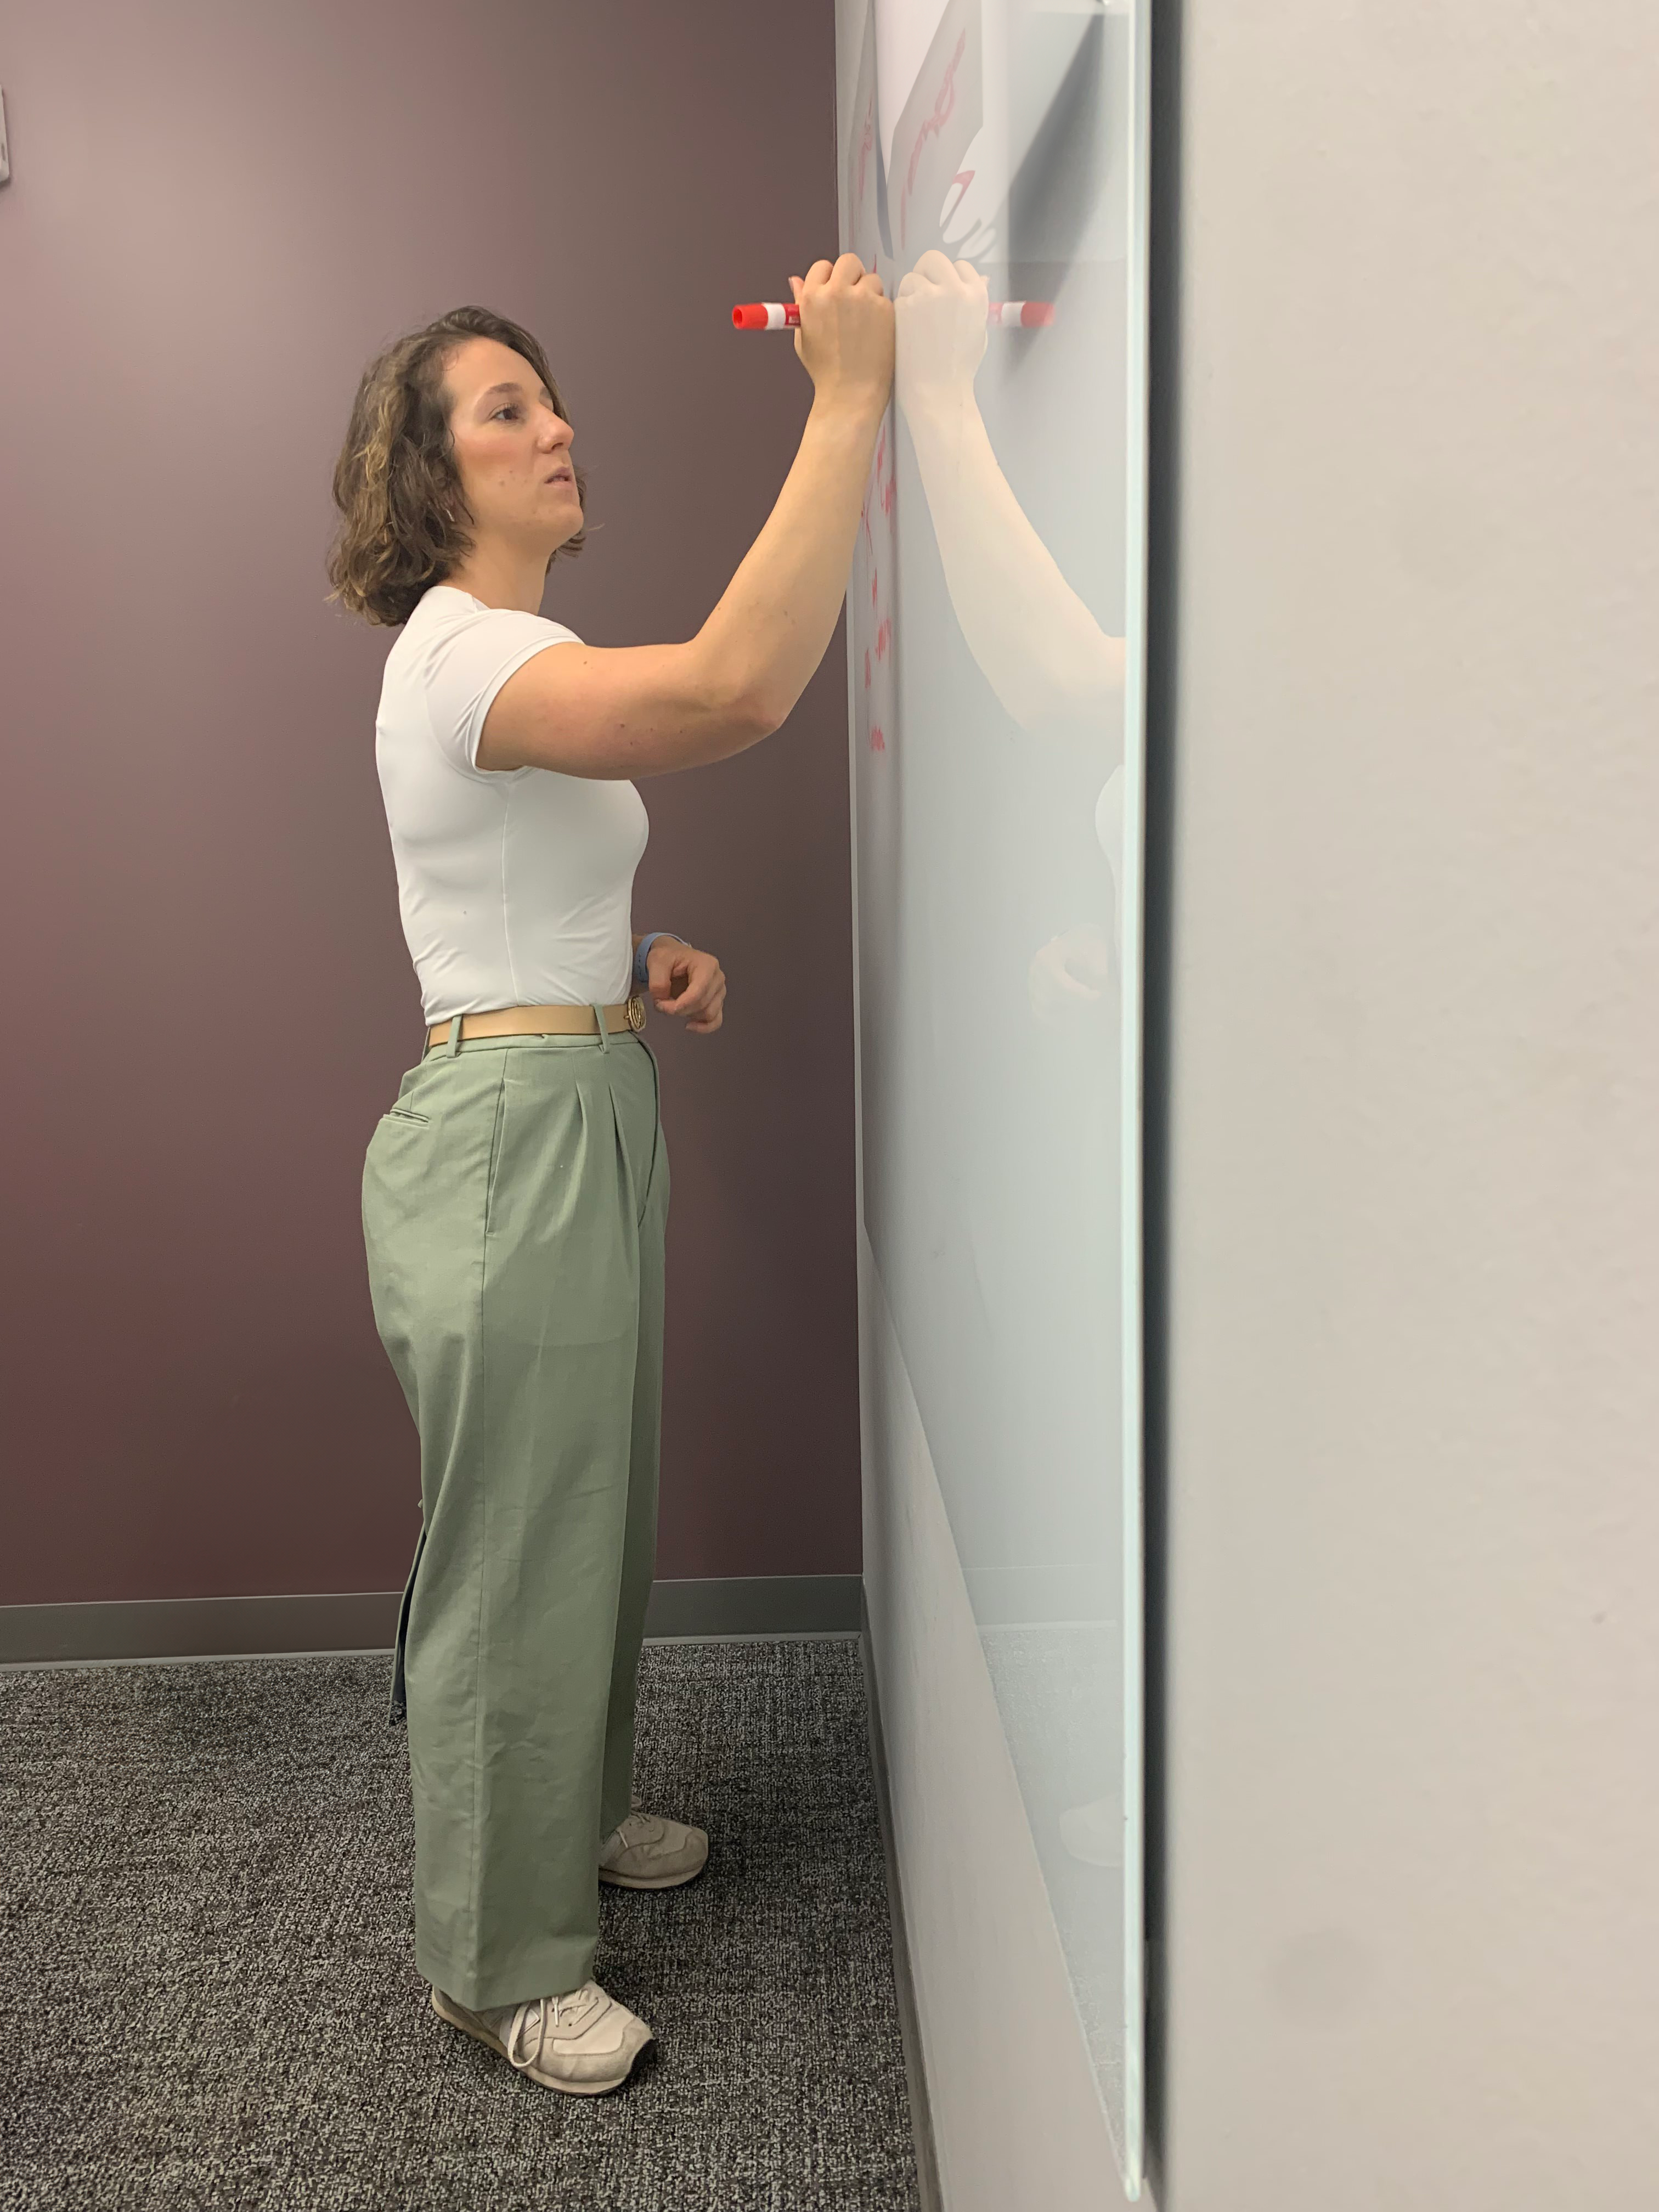 Julianna King drawing on a whiteboard in the School of Kinesiology